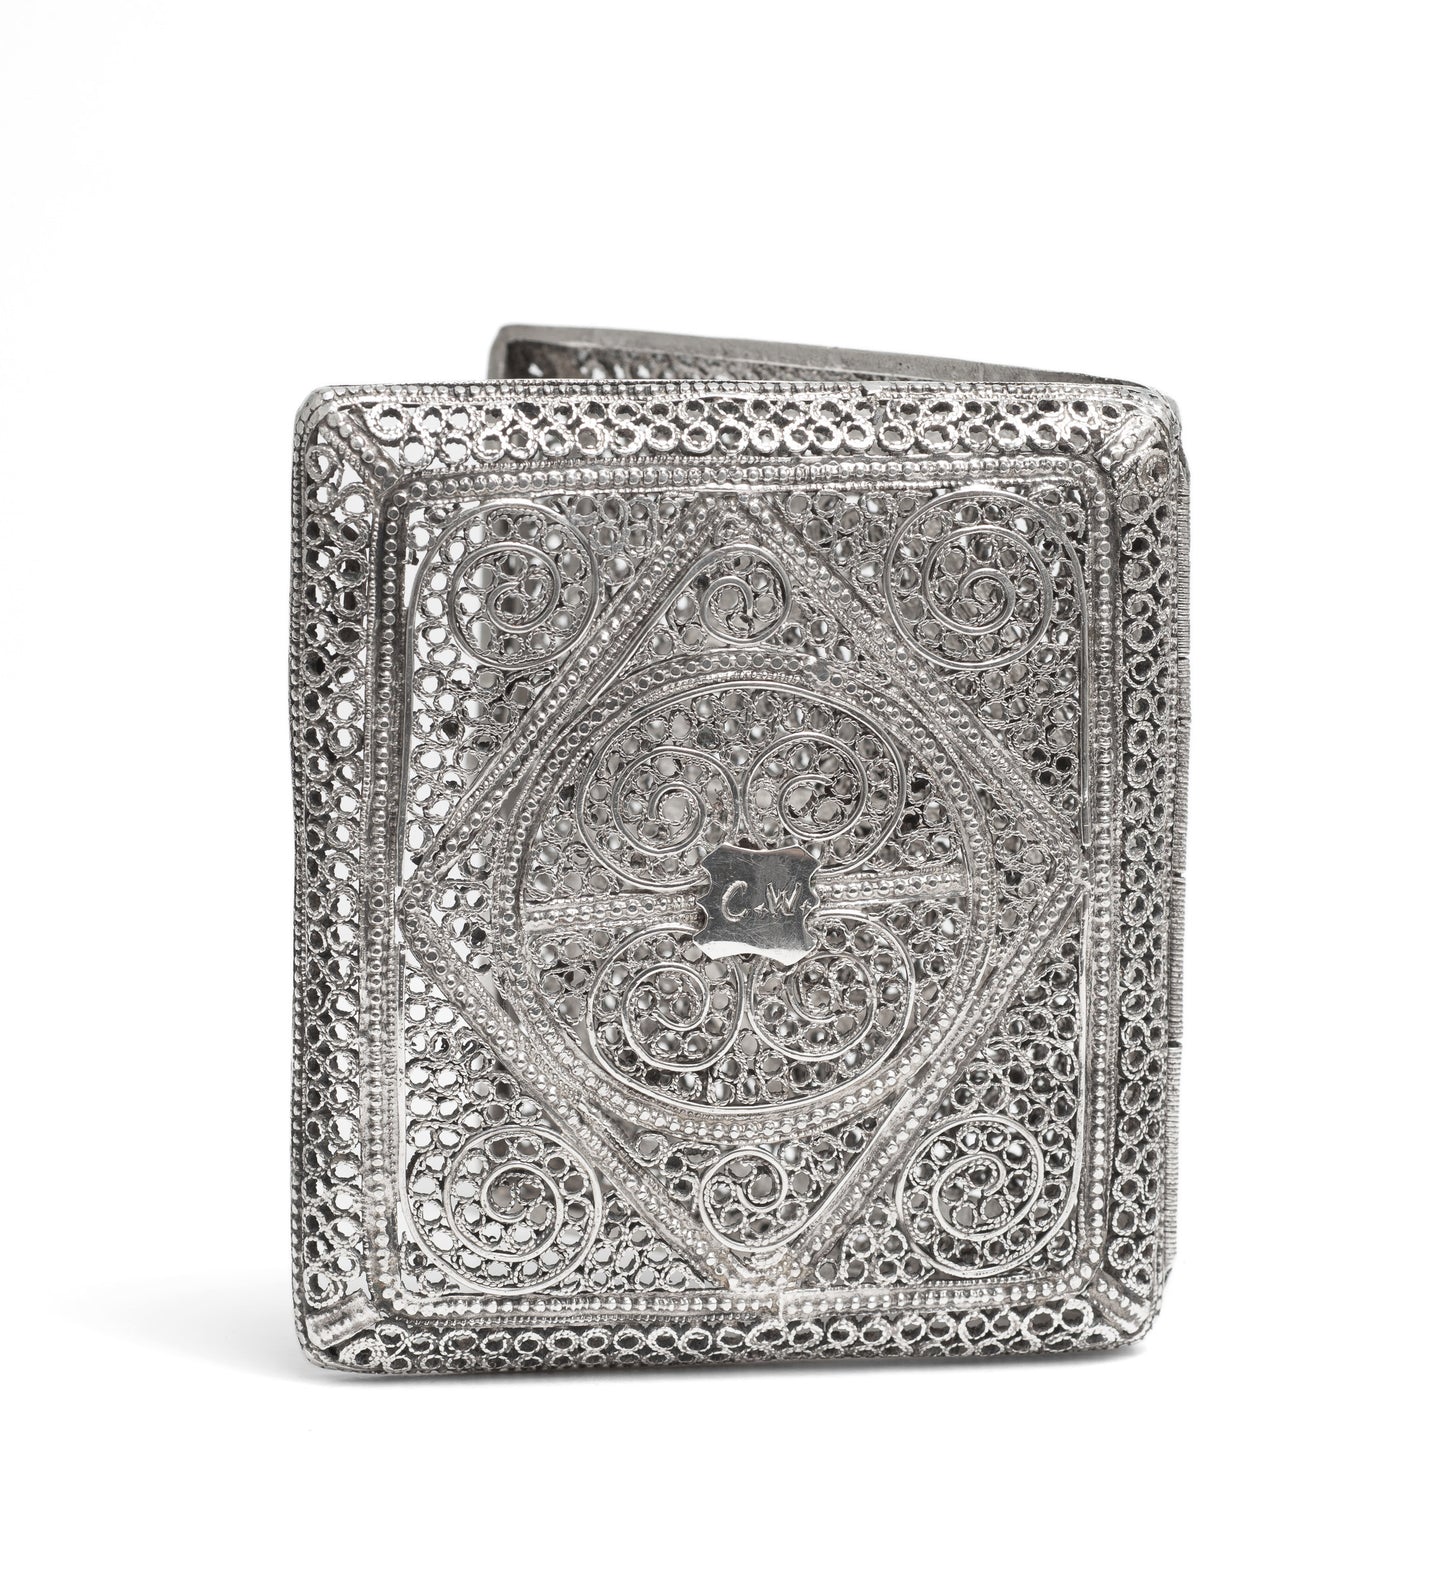 Antique Middle Eastern Hand Made Silver Filigree Wire Cigarette Case c1890 (Code 2221)